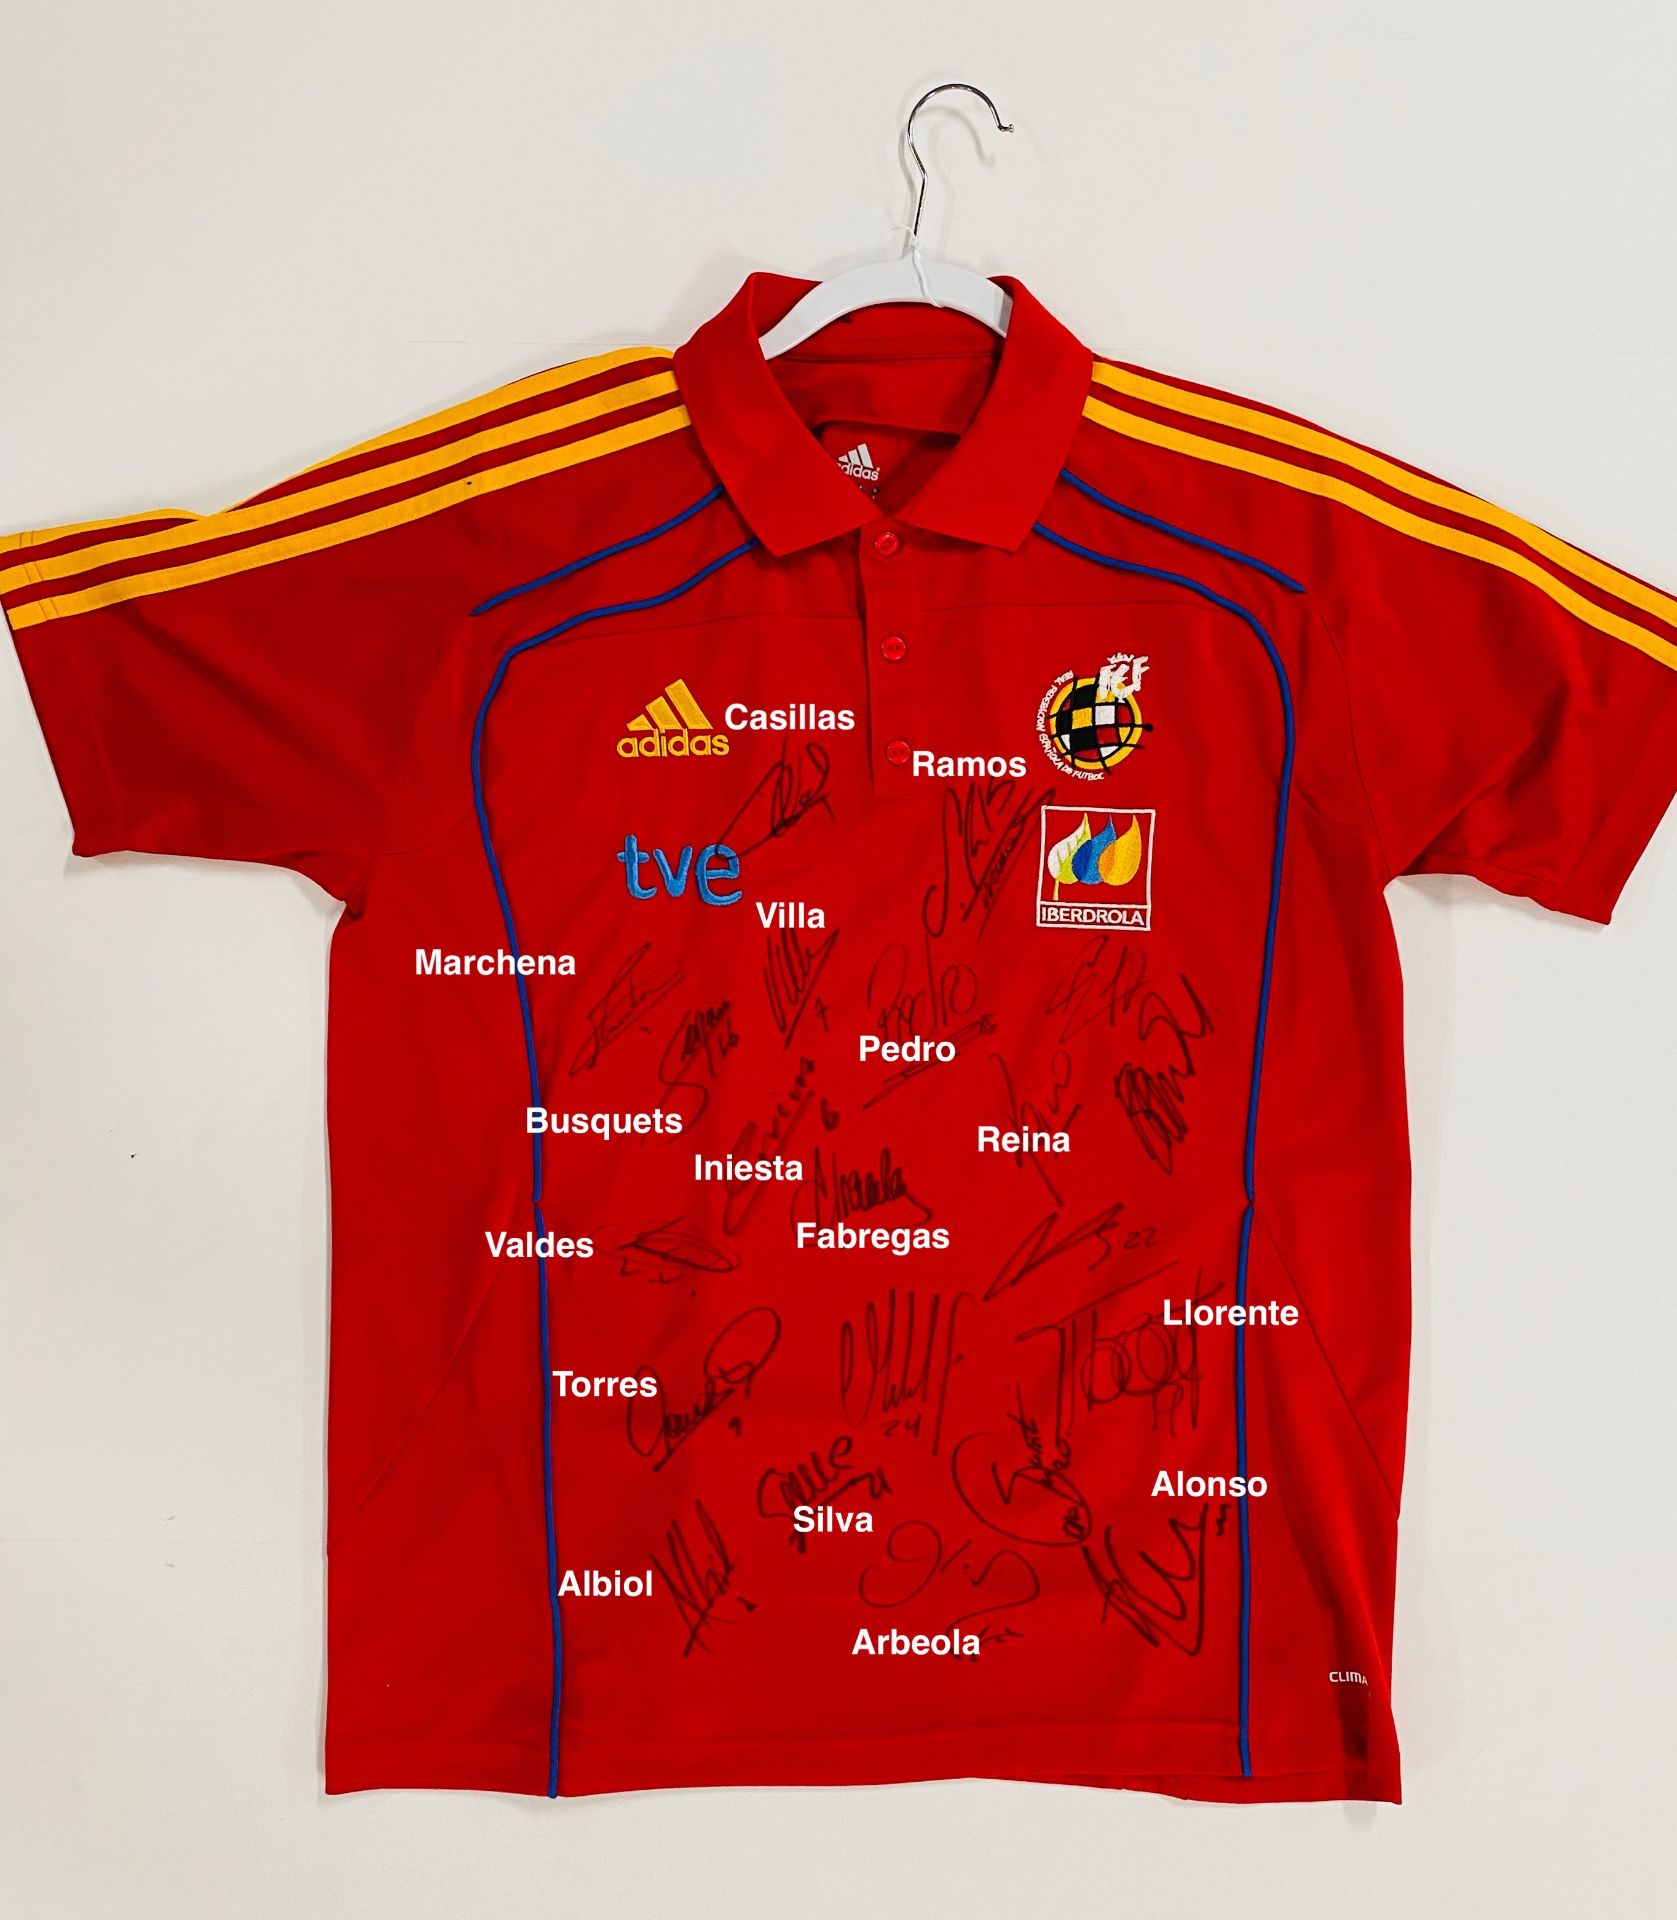 Spain 2010 World Cup signed jersey